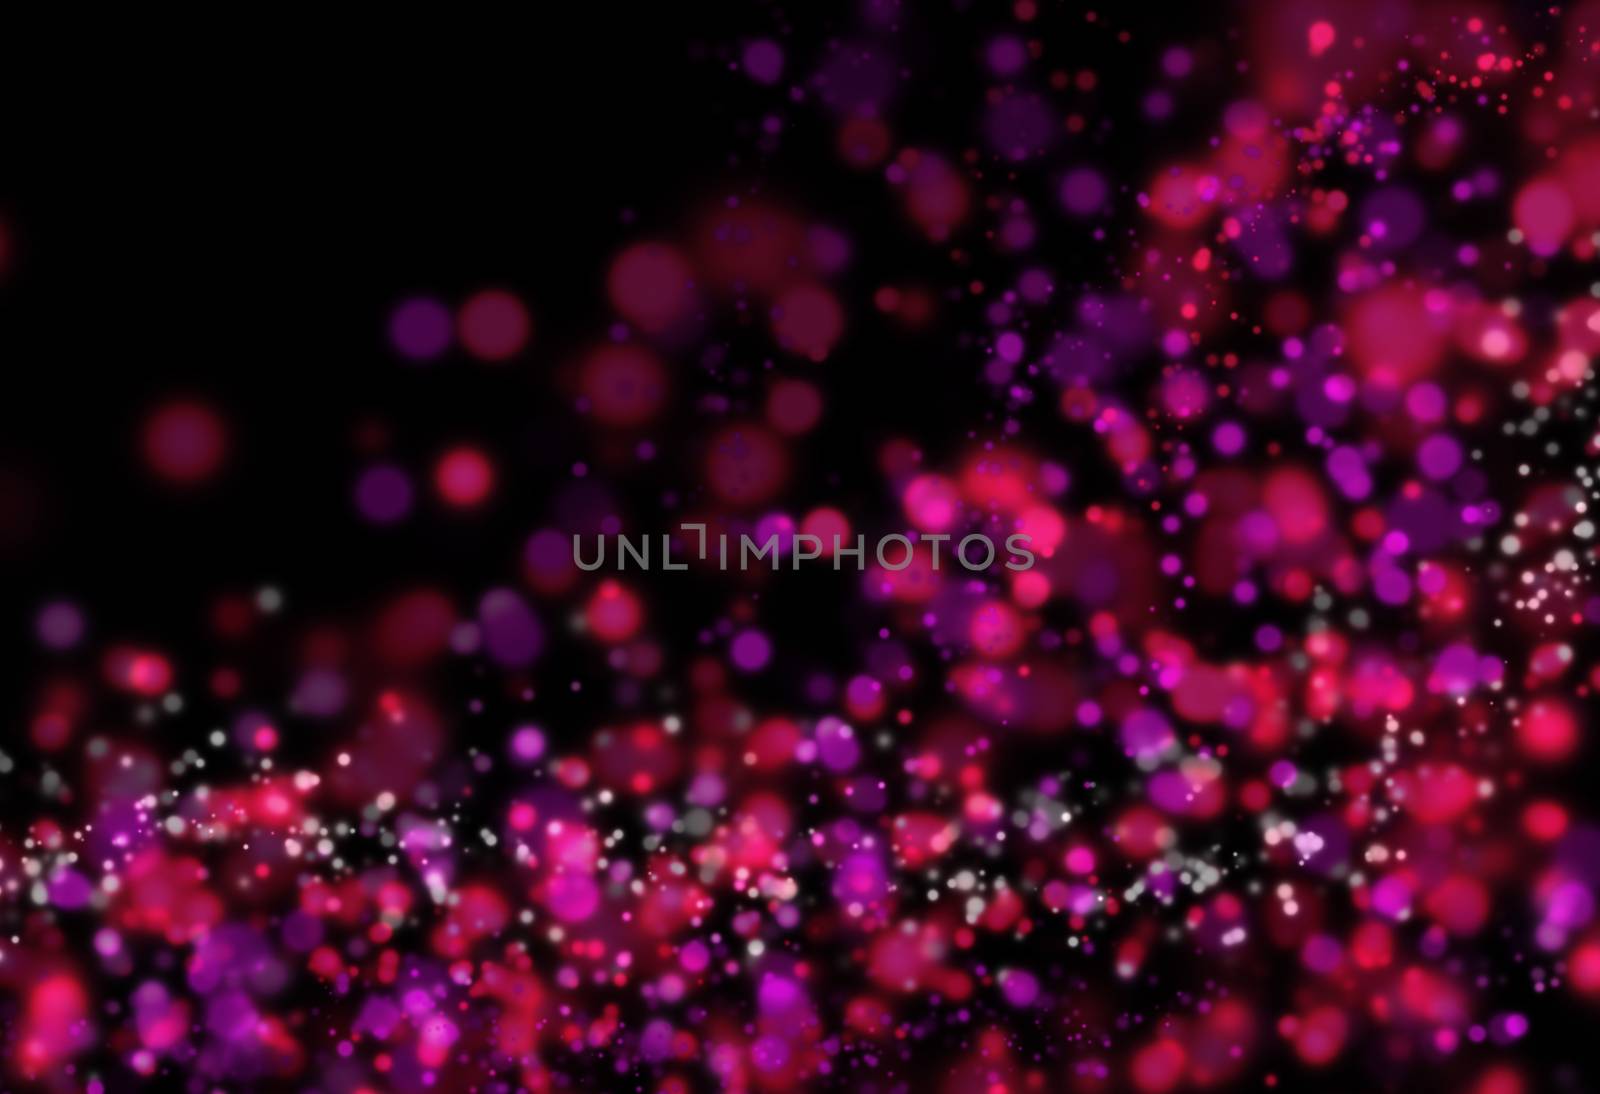 Pink and red nice bright abstract background